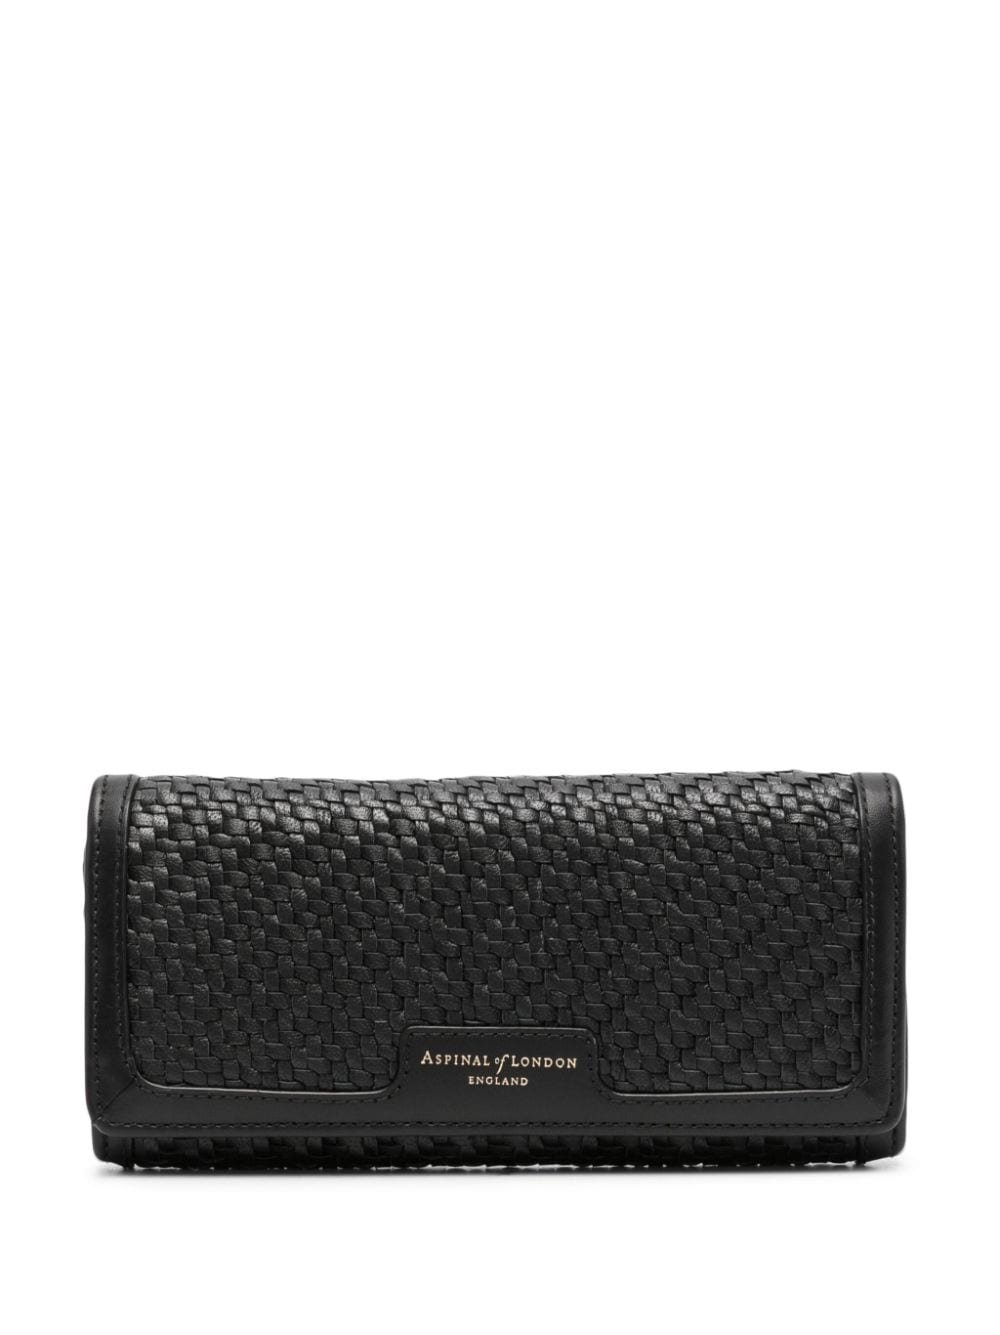 Aspinal Of London London Purse interwoven-leather wallet - Black von Aspinal Of London